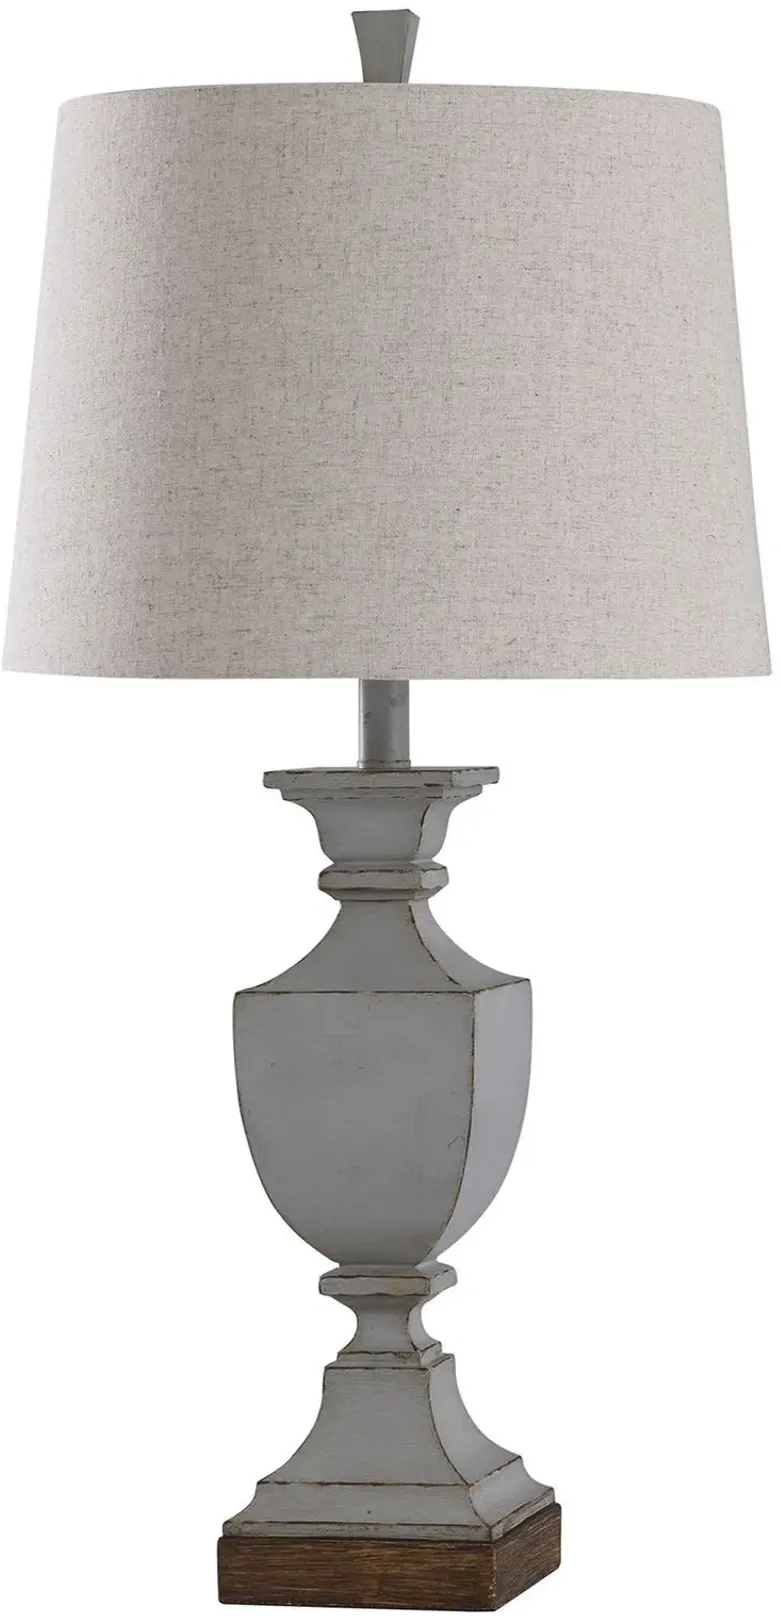 Traditional Weathered Finish 30" Table Lamp